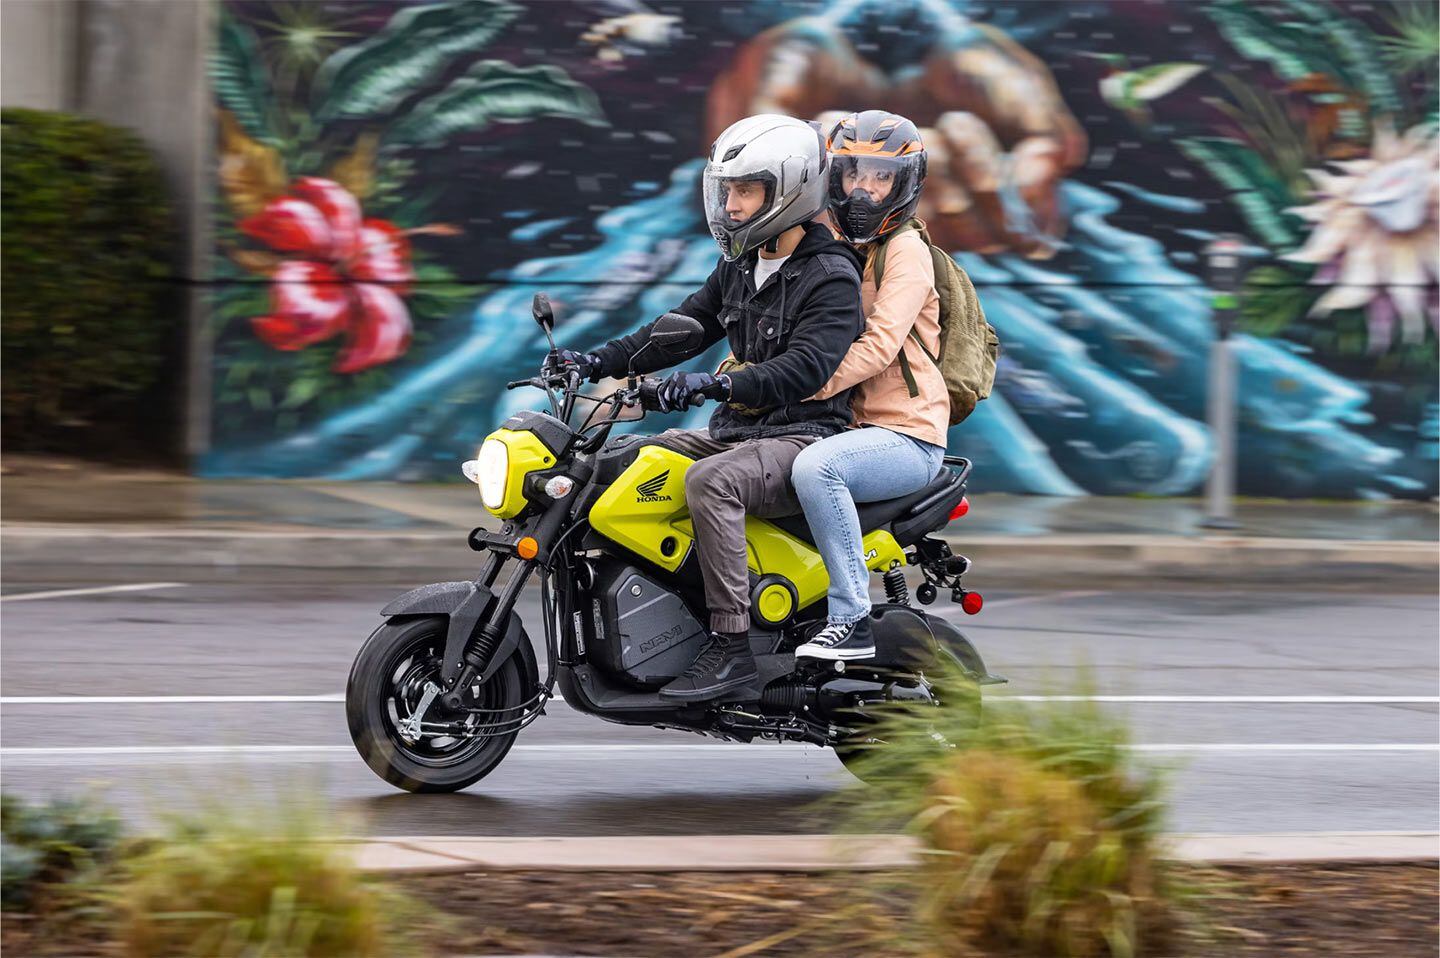 Remember young love? Date night can start with a quick trip to the wine store on the Honda Navi.